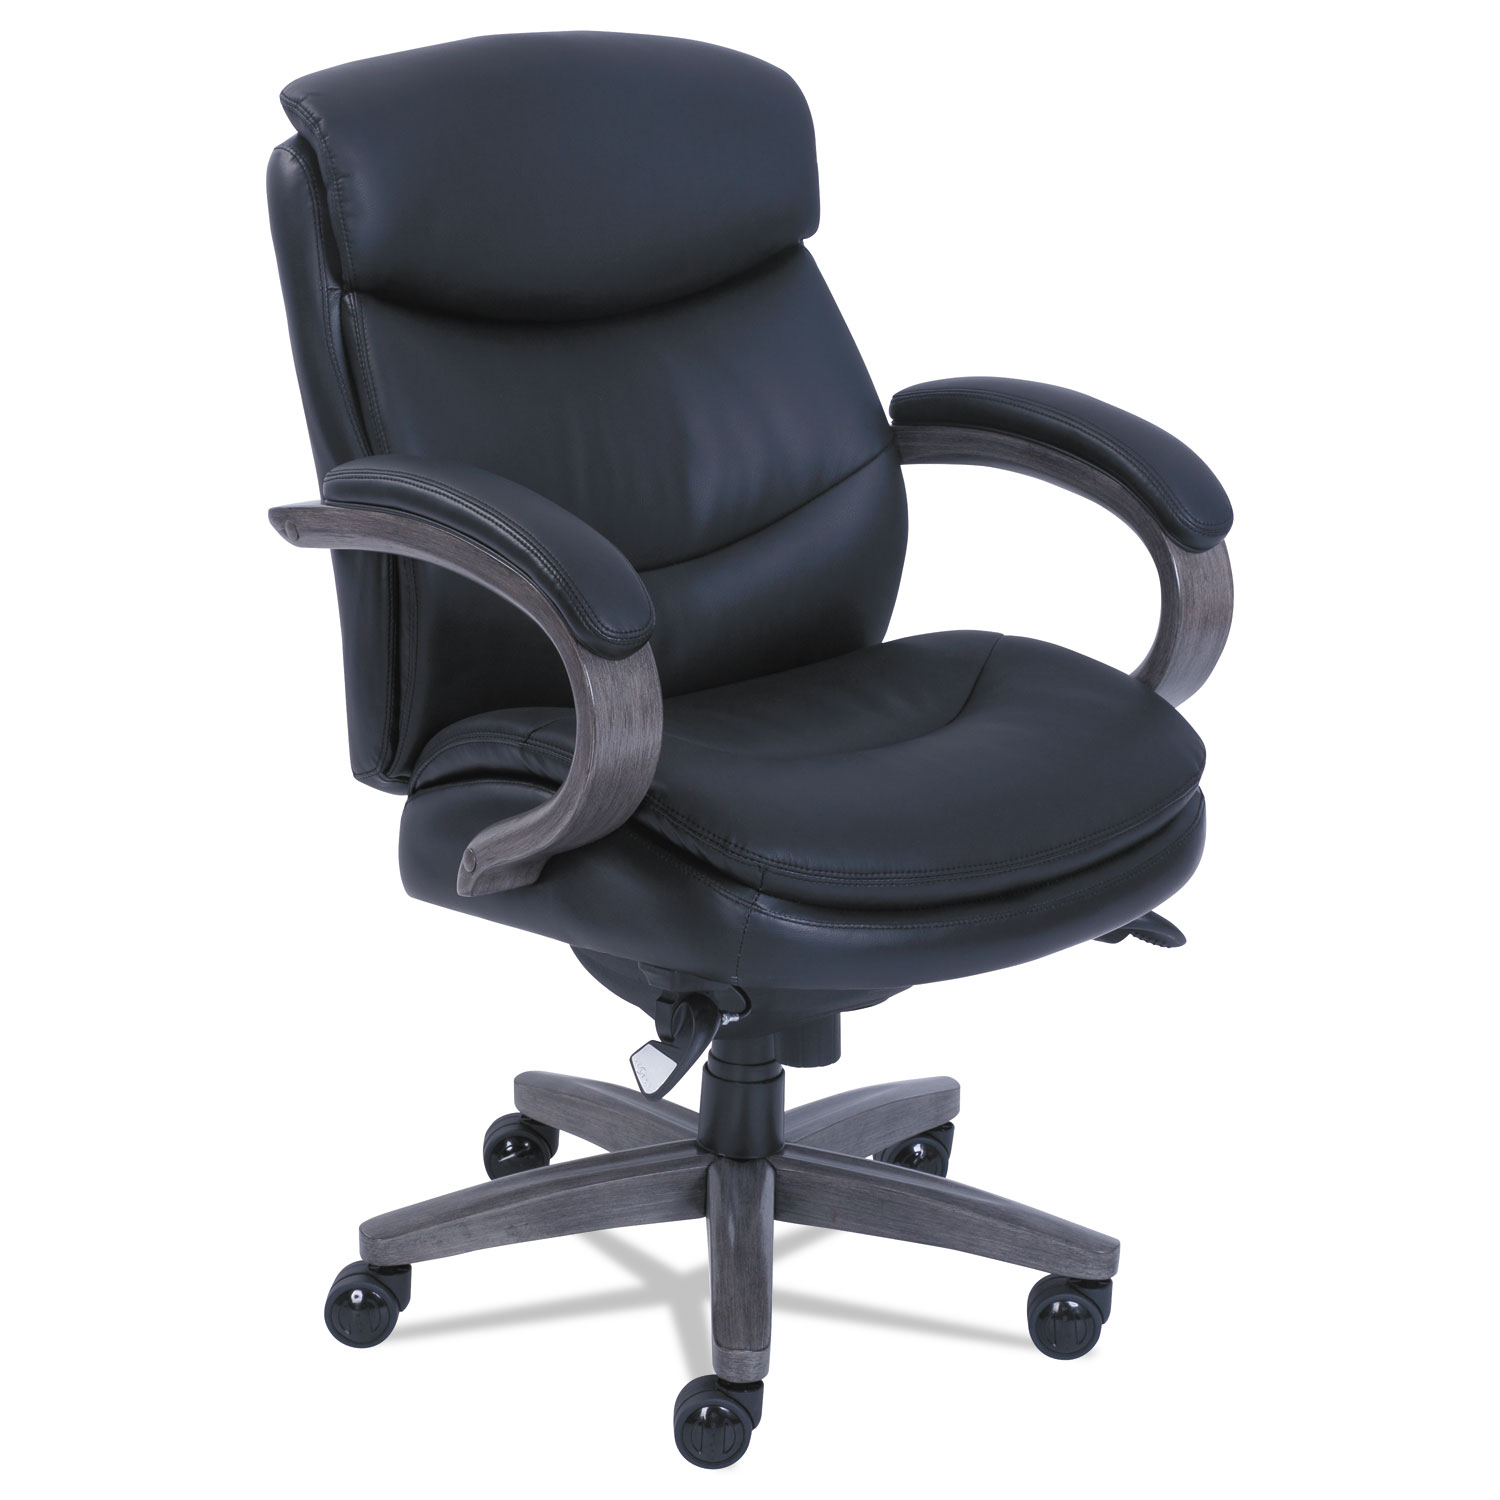  La-Z-Boy 48963A Woodbury Mid-Back Executive Chair, Supports up to 300 lbs., Black Seat/Black Back, Weathered Gray Base (LZB48963A) 